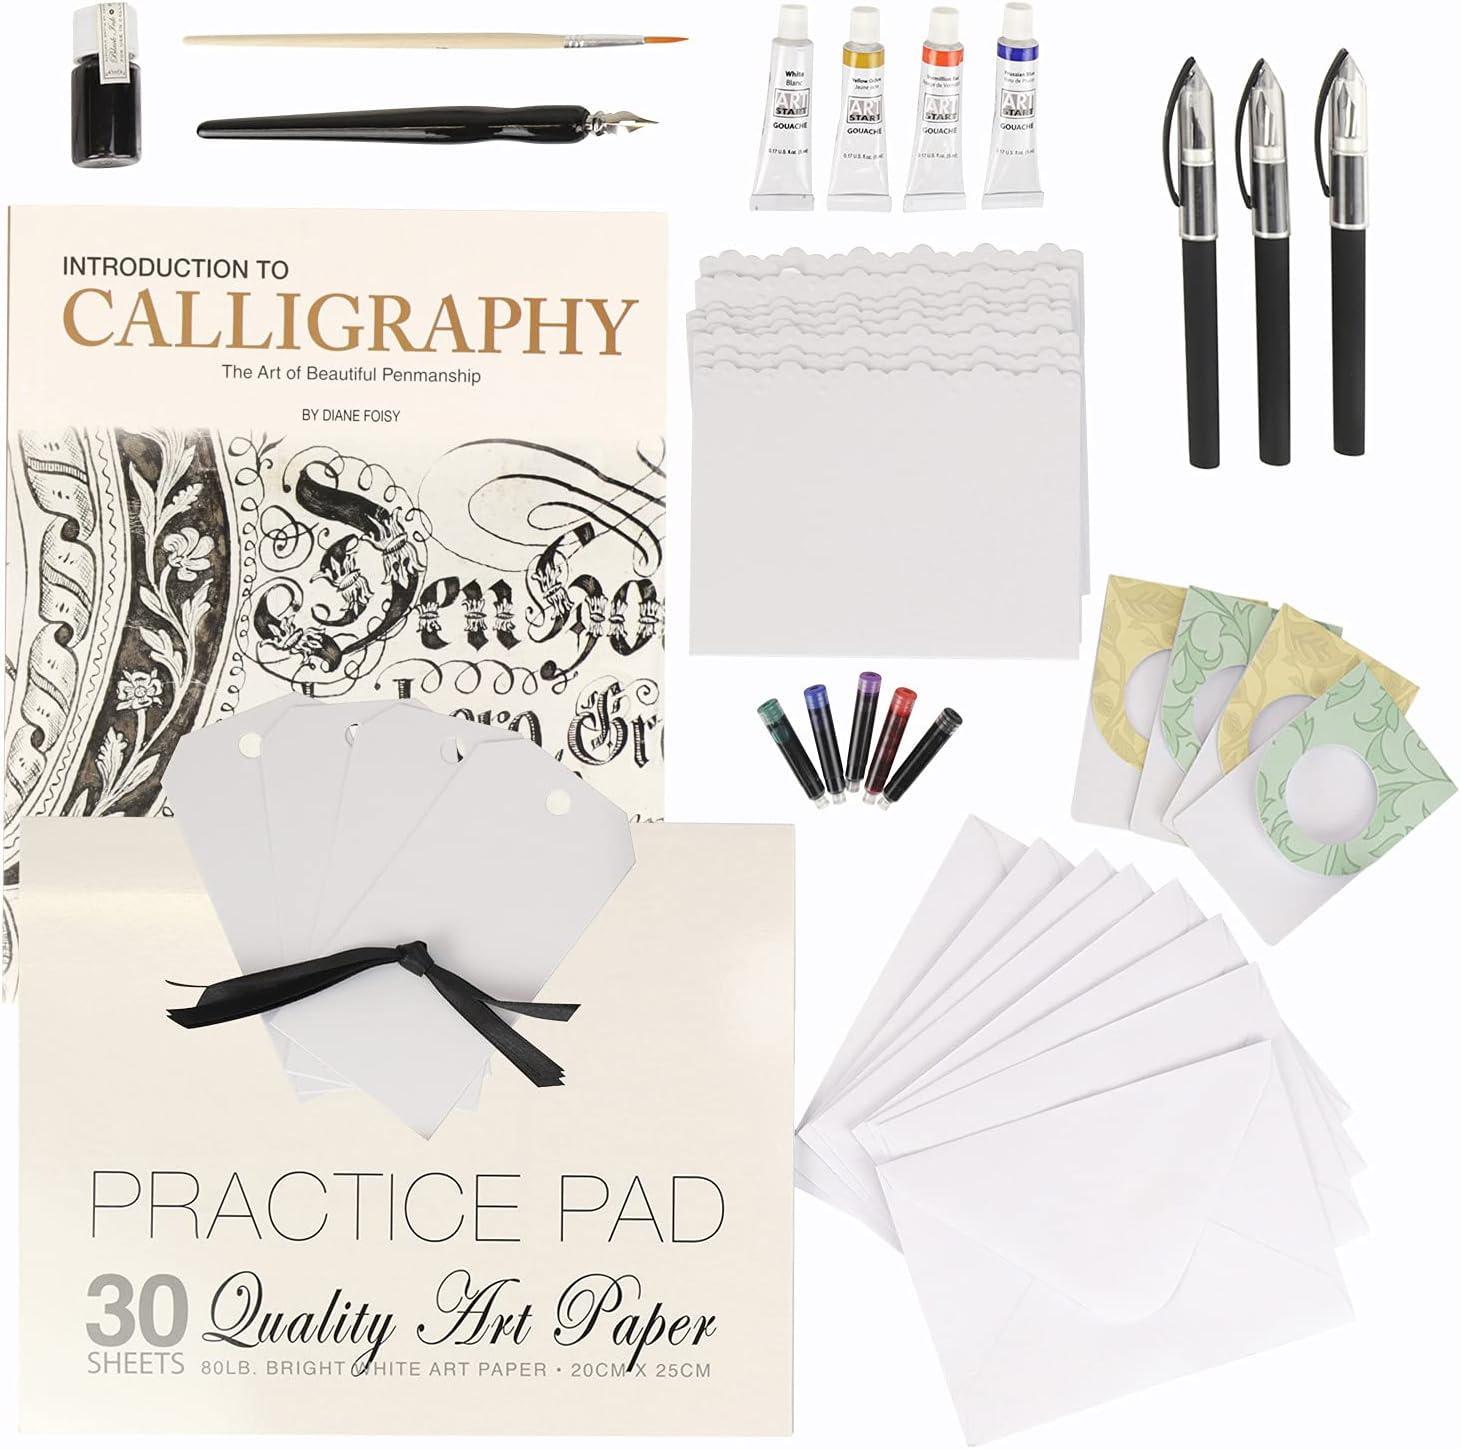 SpiceBox Adult Art Craft ＆ Hobby Kits Sketch Plus Cards ＆ Calligraphy, 14  Greeting Cards to Customize, Art Kit for Adult